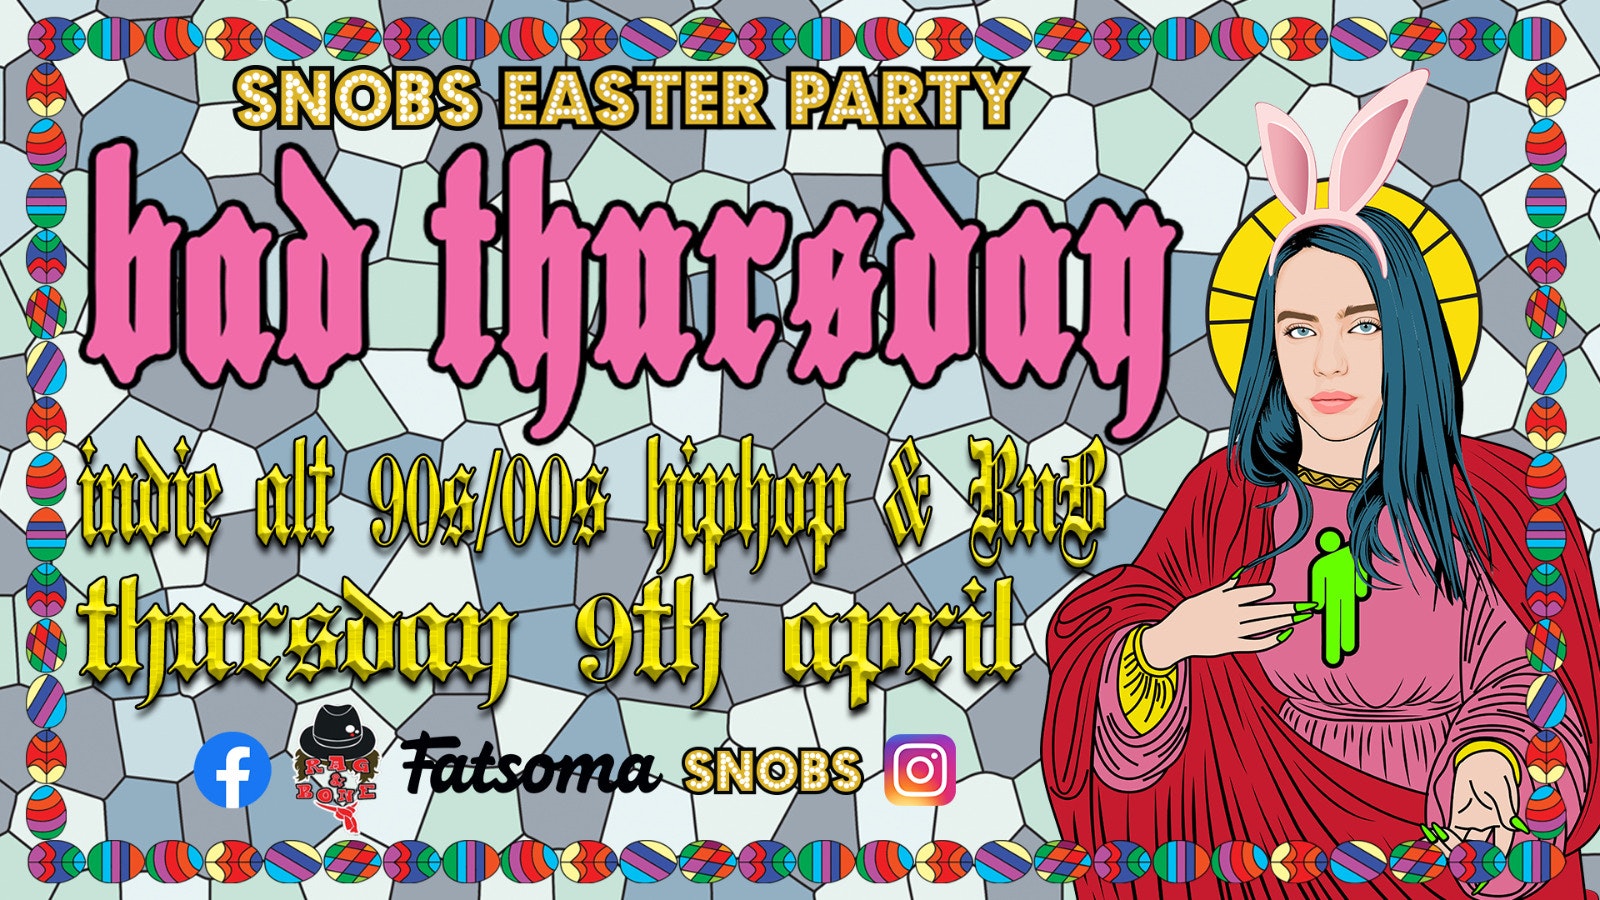 Bad Thursday – Snobs Easter Party